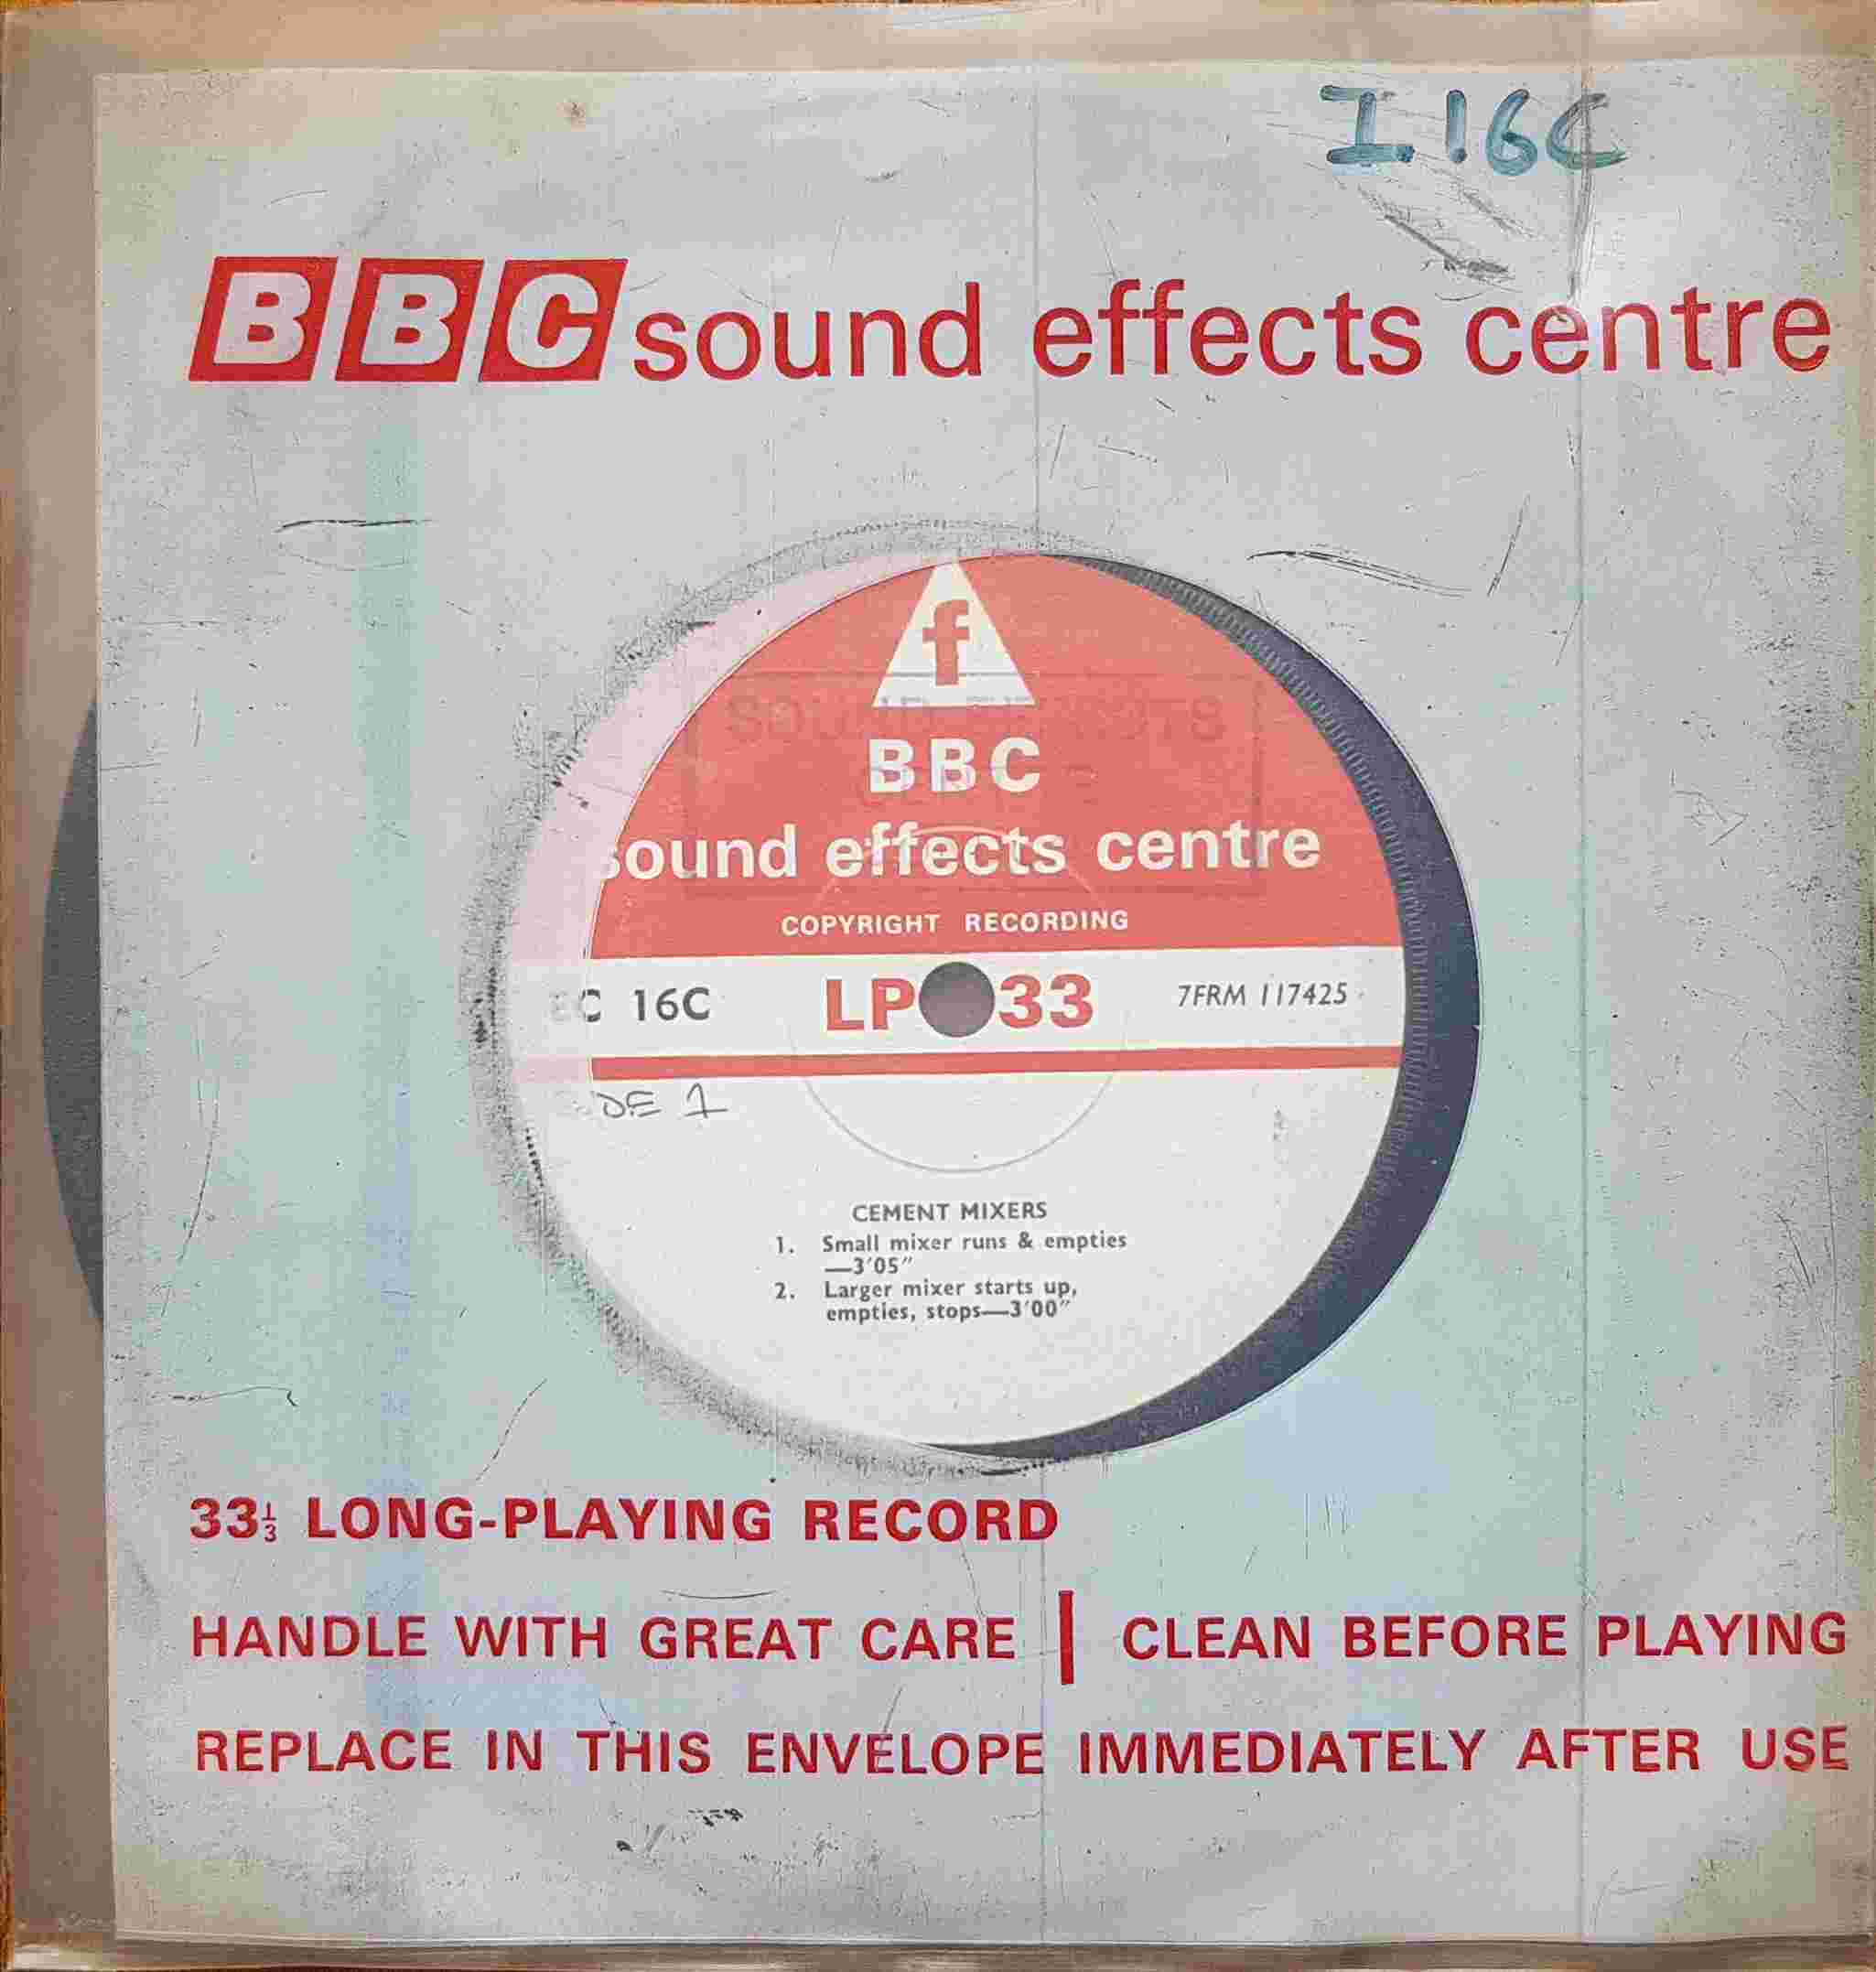 Picture of EC 16C Cement mixers / Building site by artist Not registered from the BBC singles - Records and Tapes library